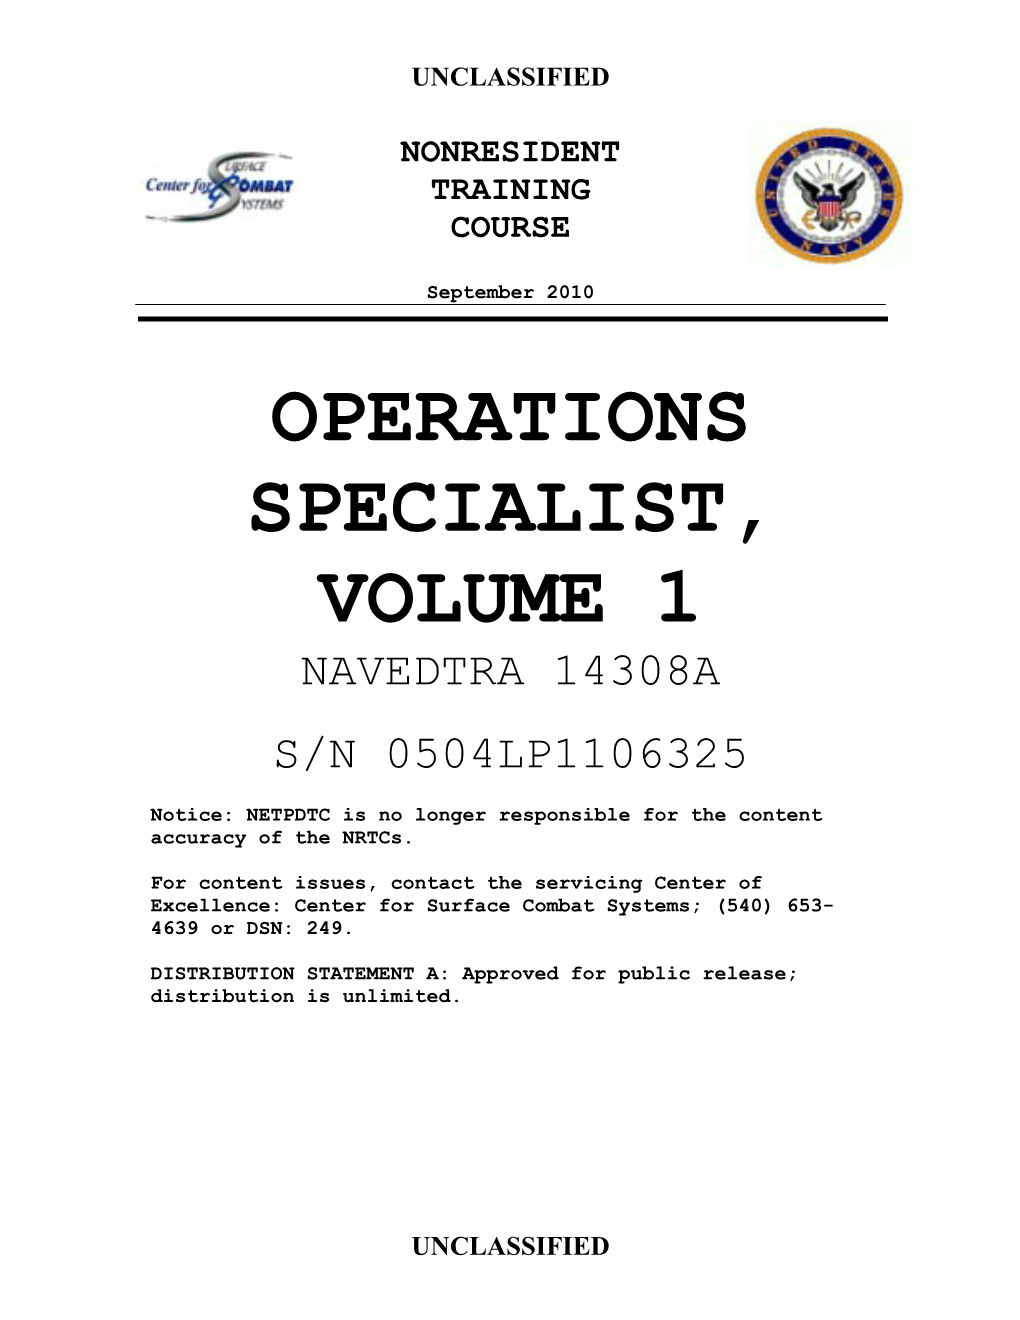 Operations Specialist, Volume 1 Navedtra 14308A